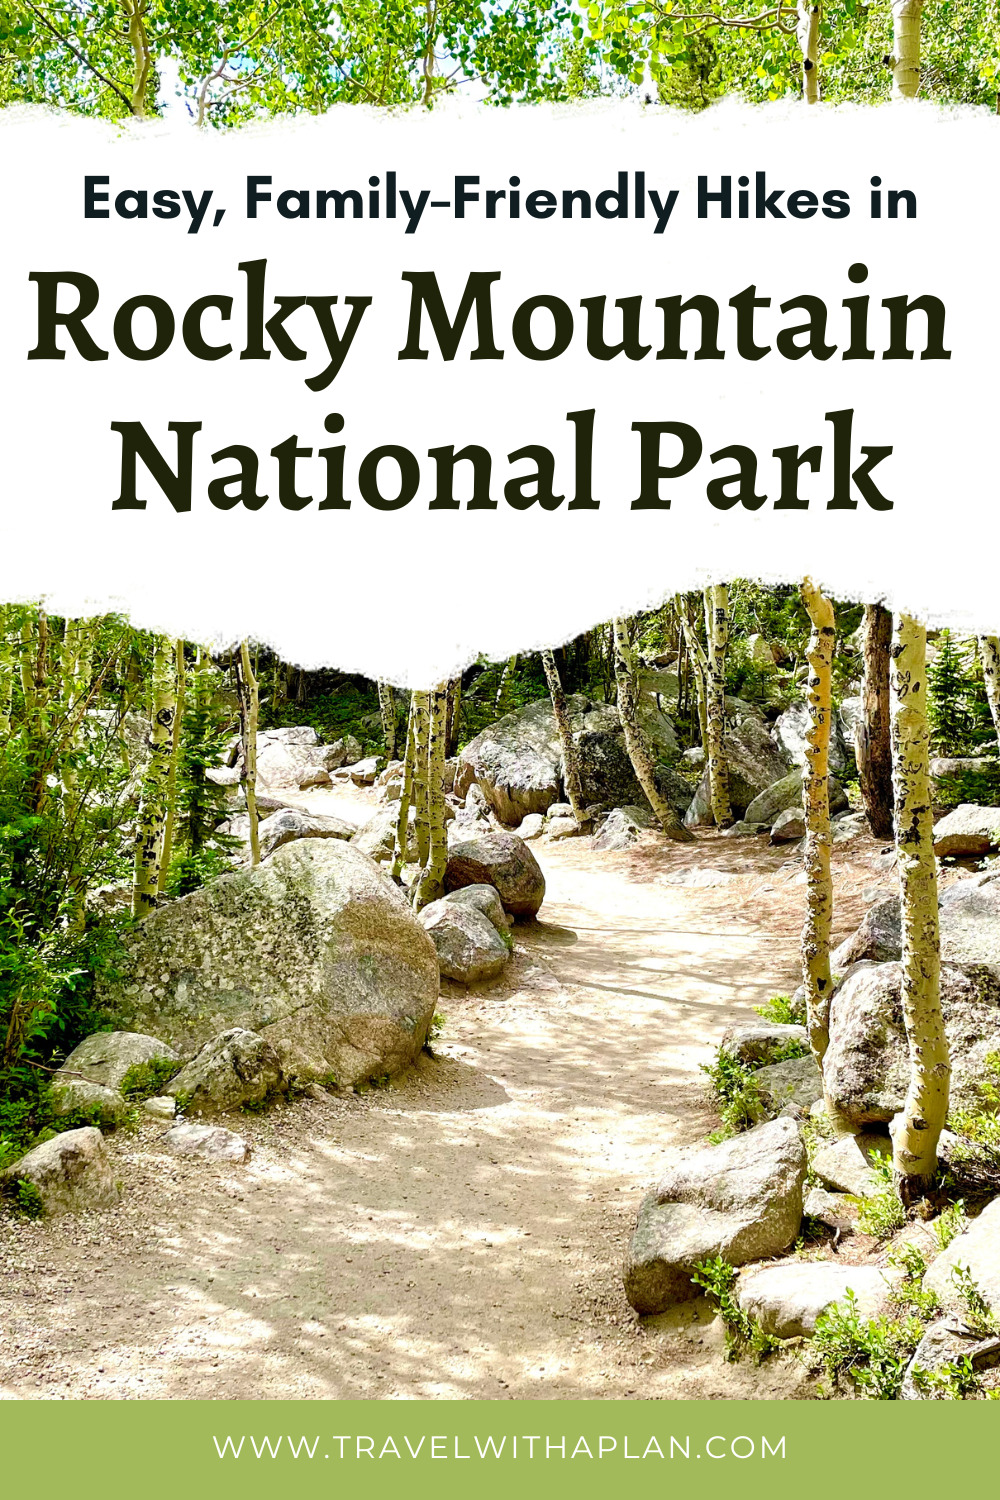 Are you a beginner hiker or traveling to Rocky Mountain National Park with kids?  Check out these 15 easy hikes in Rocky Mountain National Park that are low of difficulty and high on beauty!  #RMNPhikes